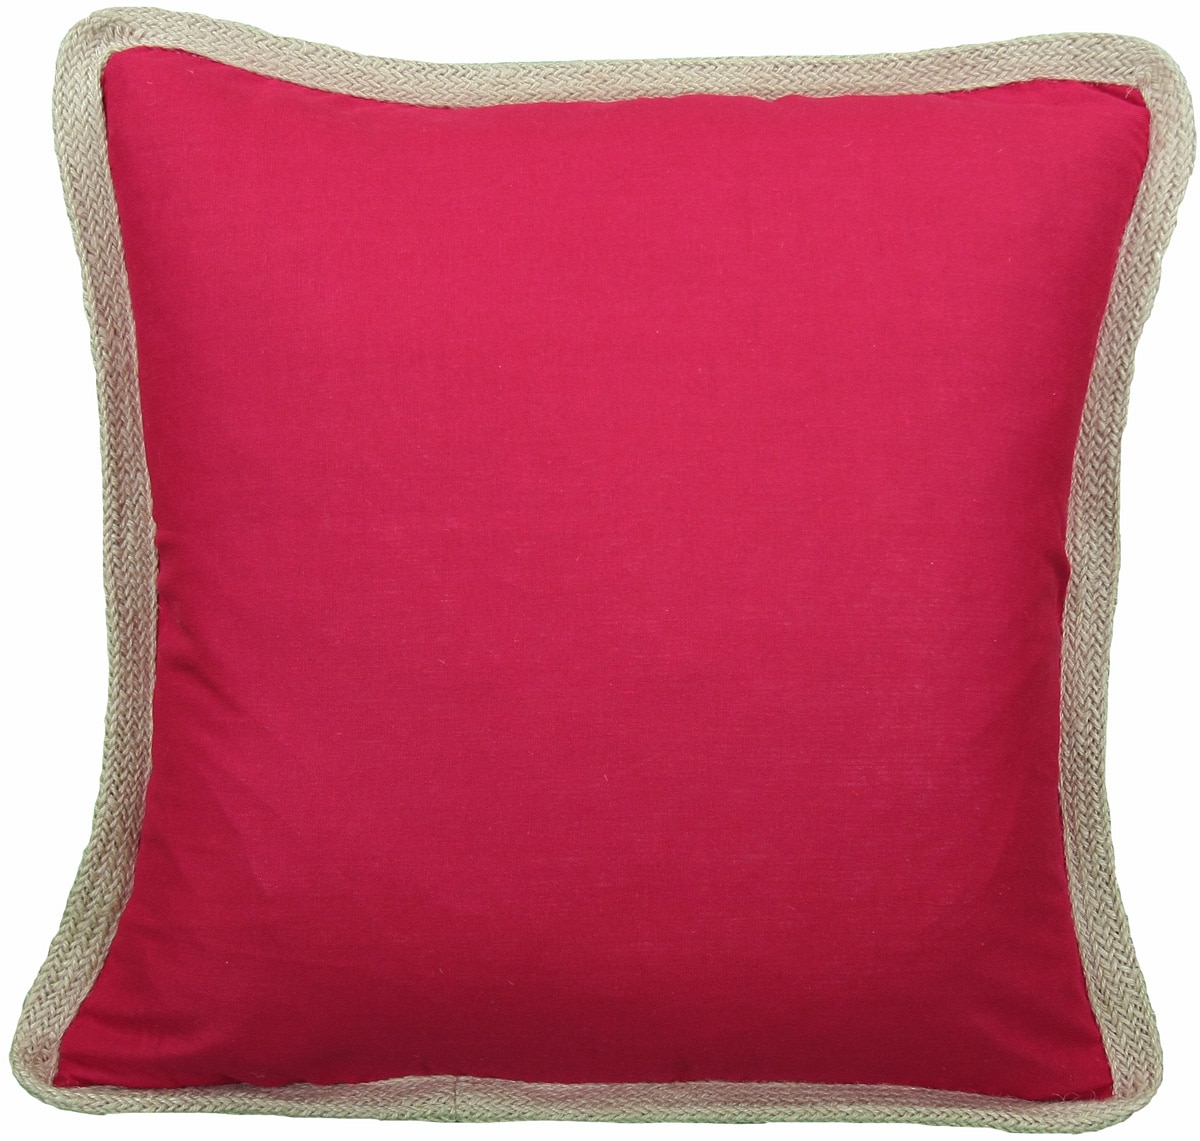 MANOR LUXE Classic Jute Trim20-in x 20-in Red Cotton Blend Indoor Decorative Pillow | ML1113082020REDFEATH